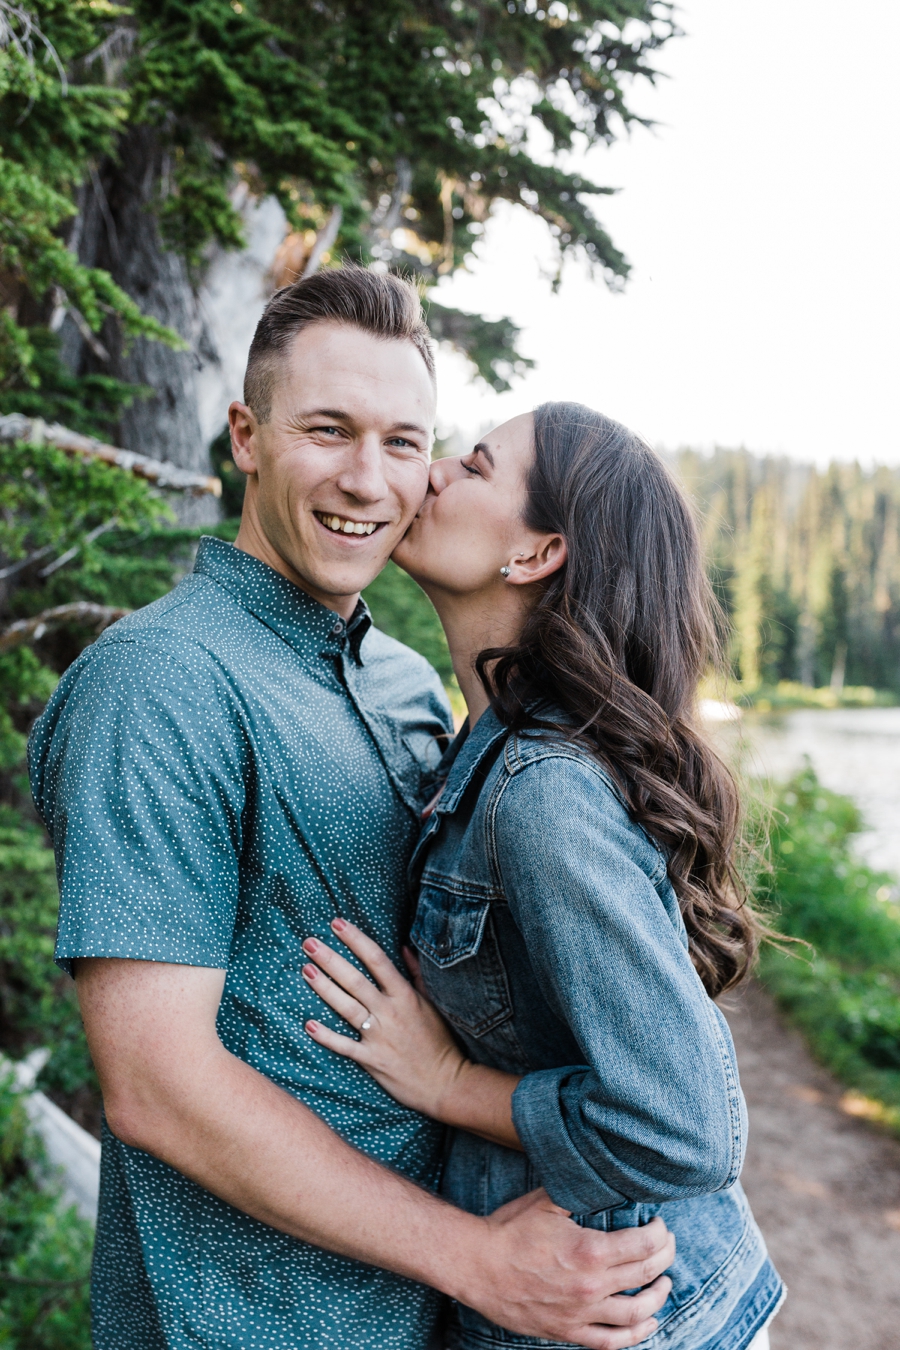 a girl kisses her fiance on the cheek during their engagement session in the mountains